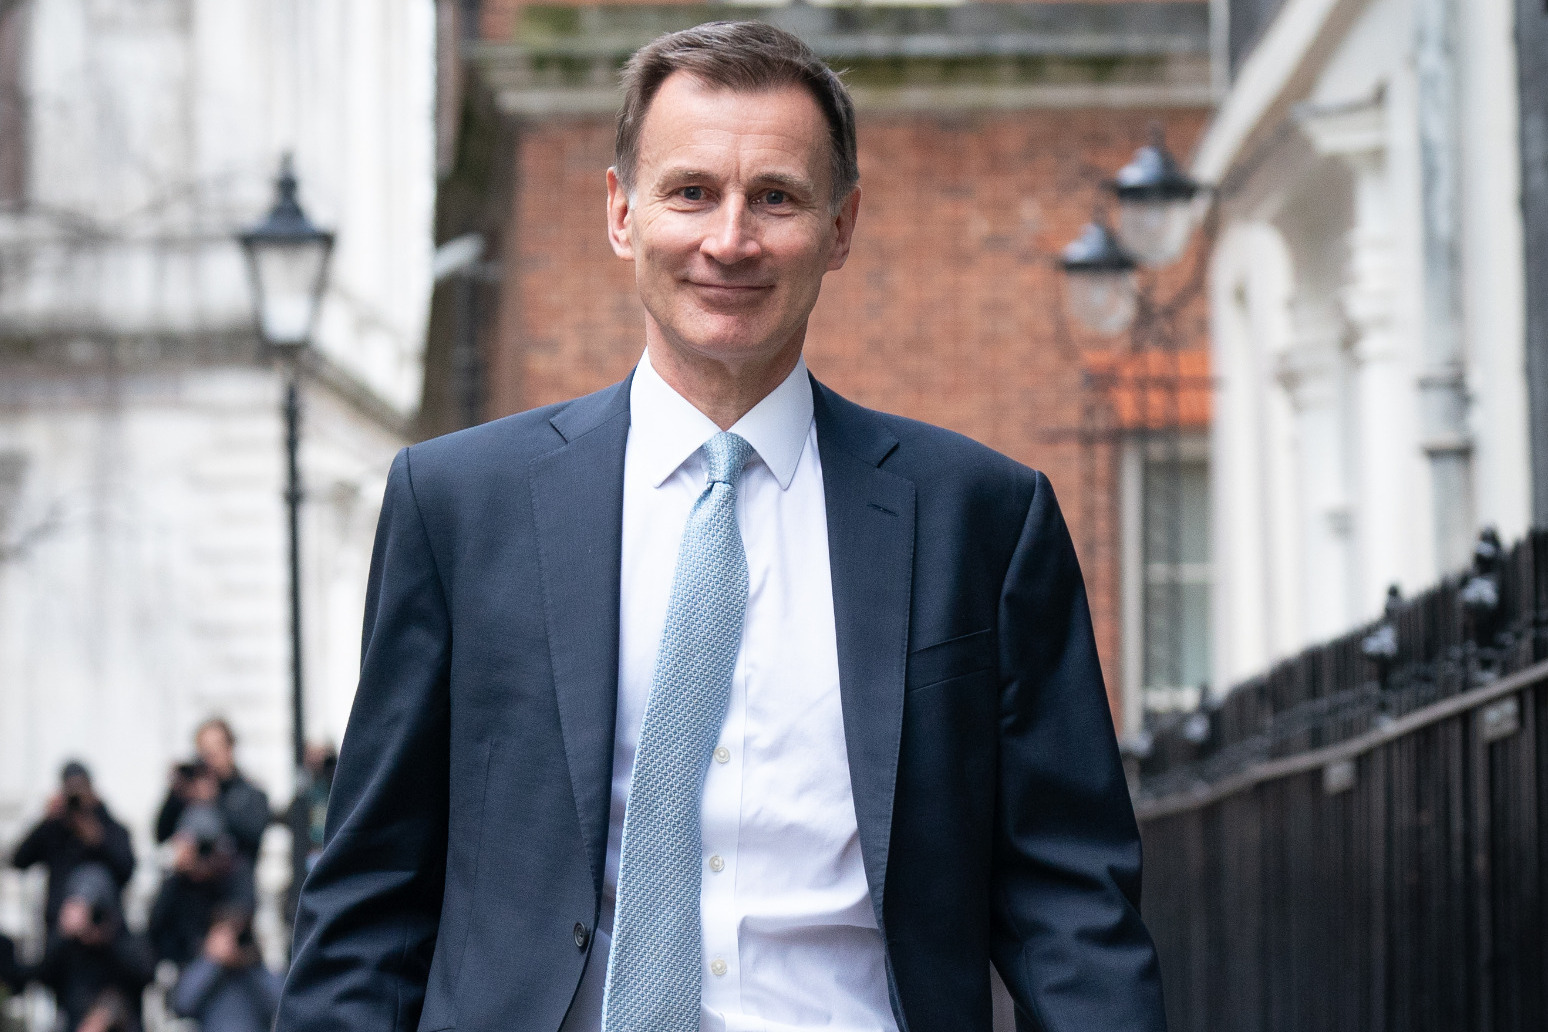 Hunt to insist UK economy is on the up